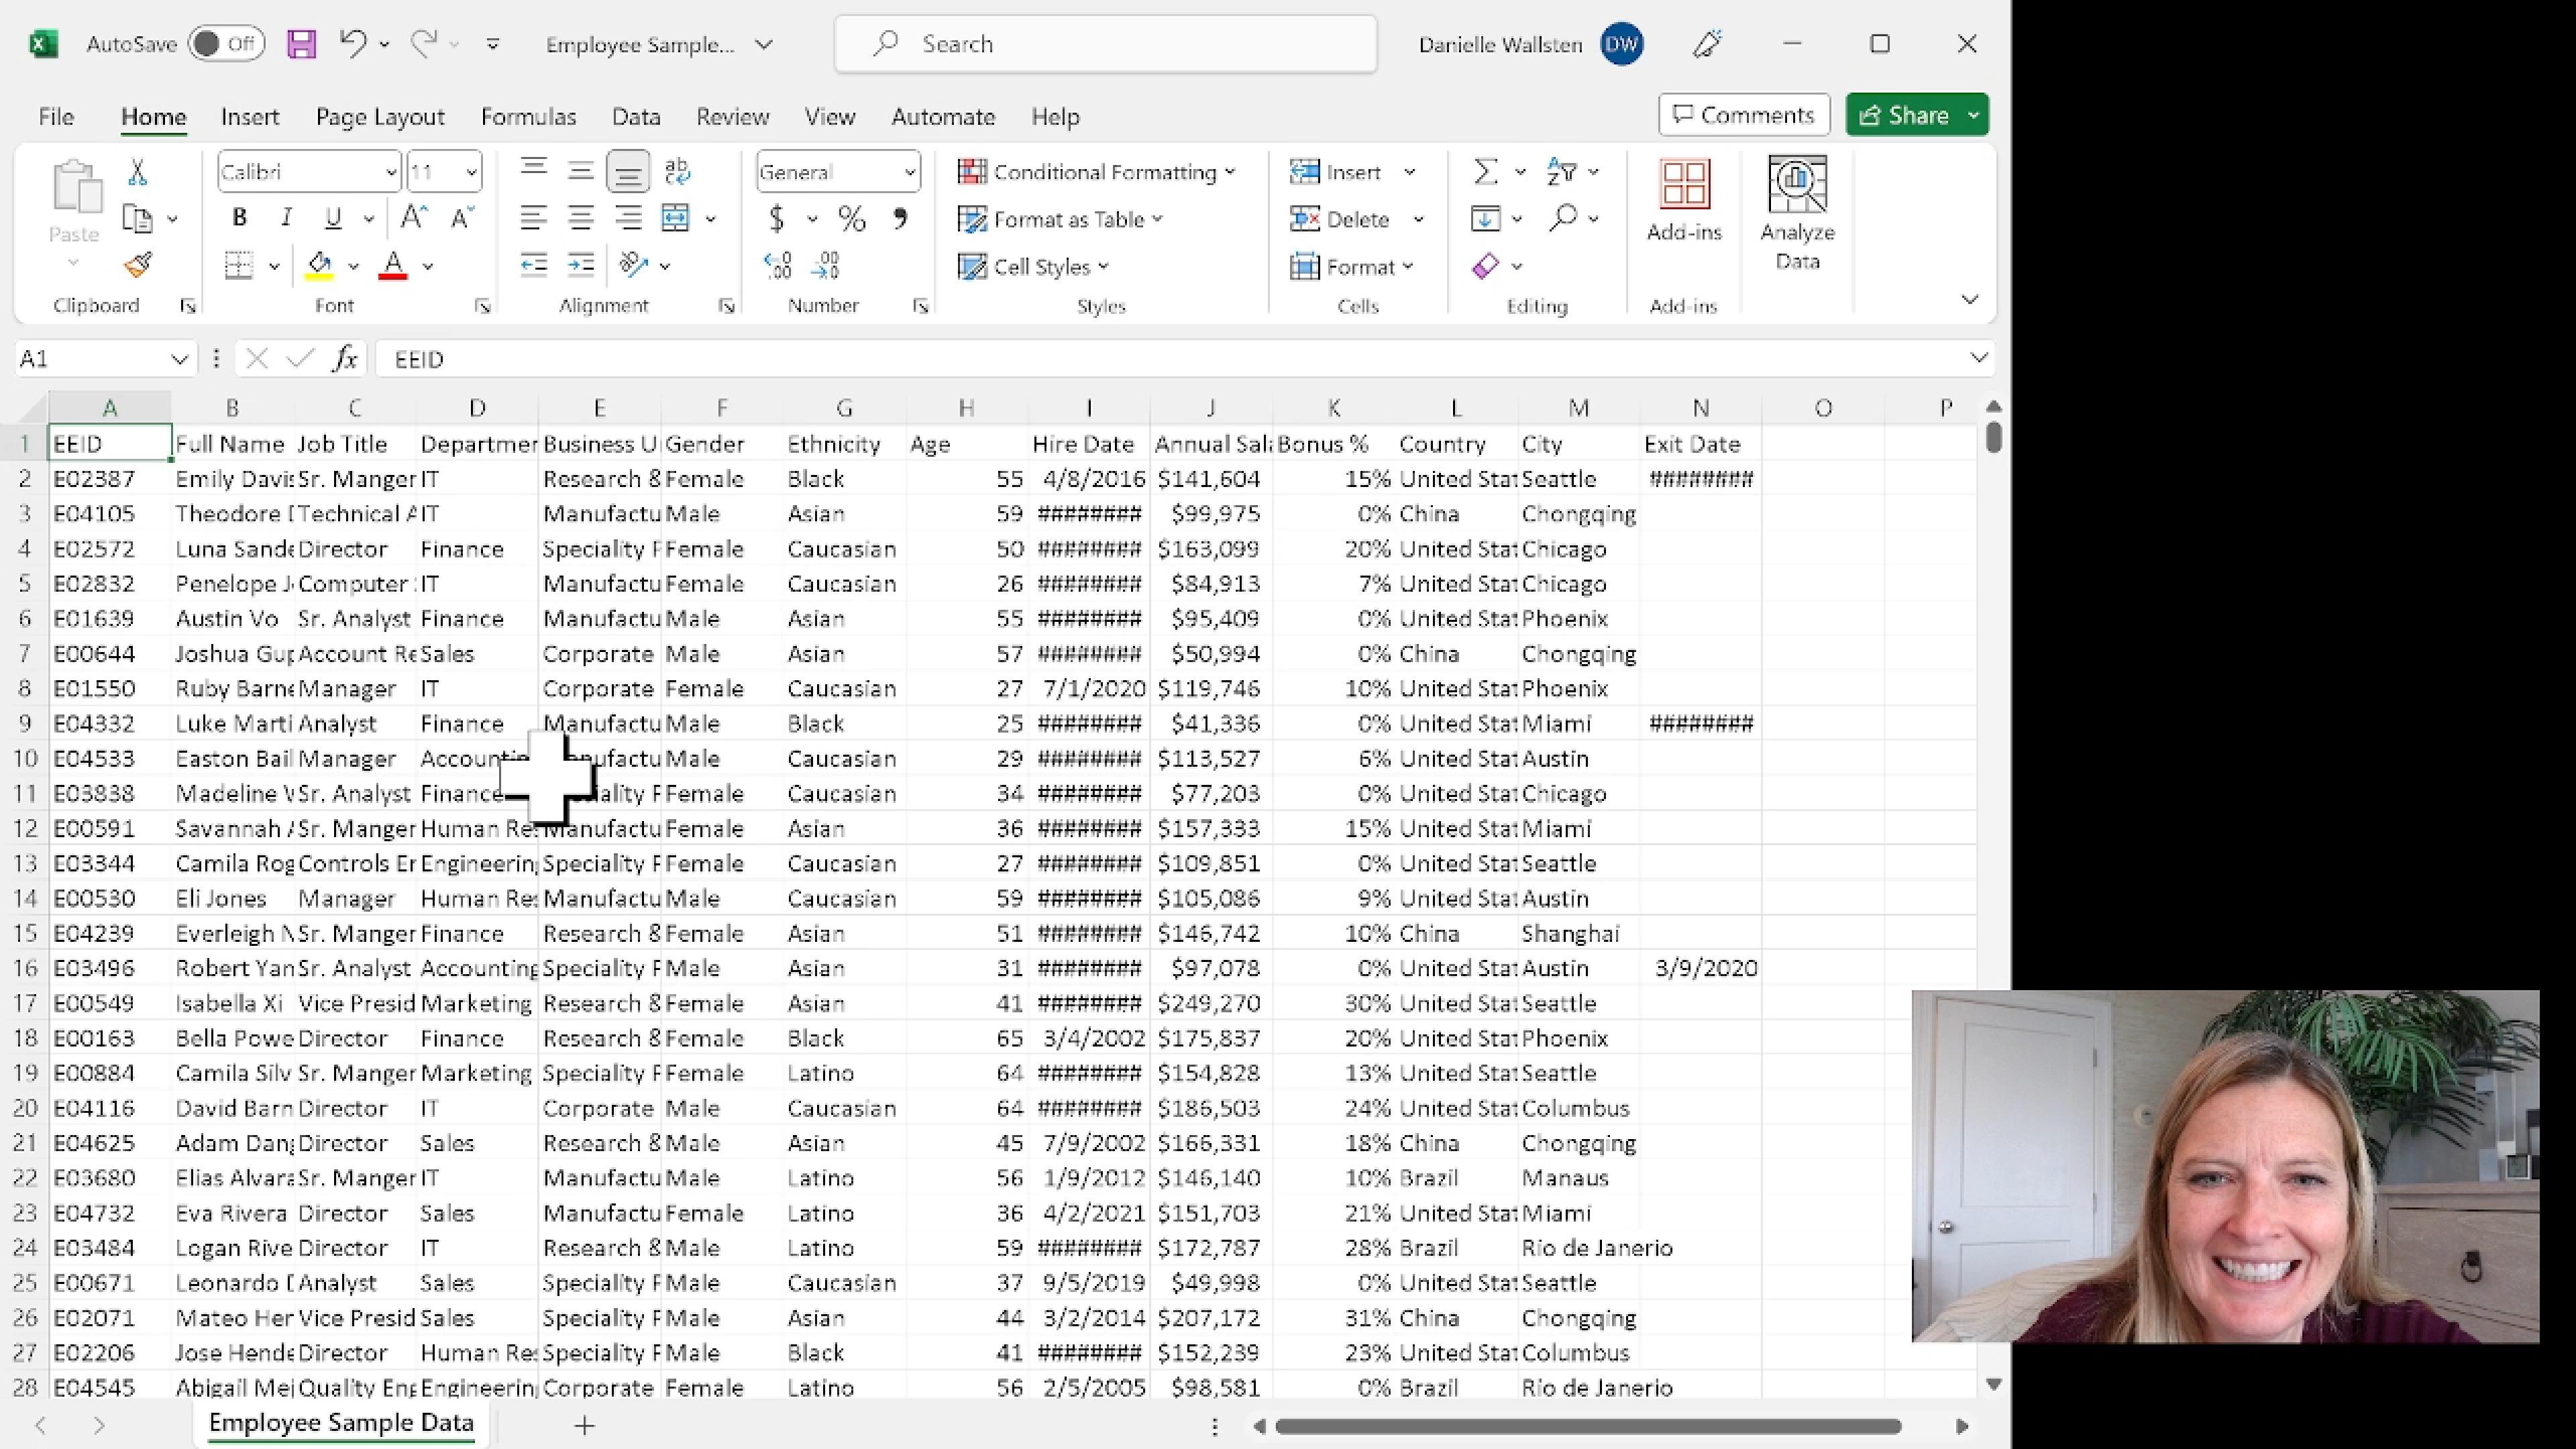 Microsoft Excel - Using Filters to Quickly Find Data